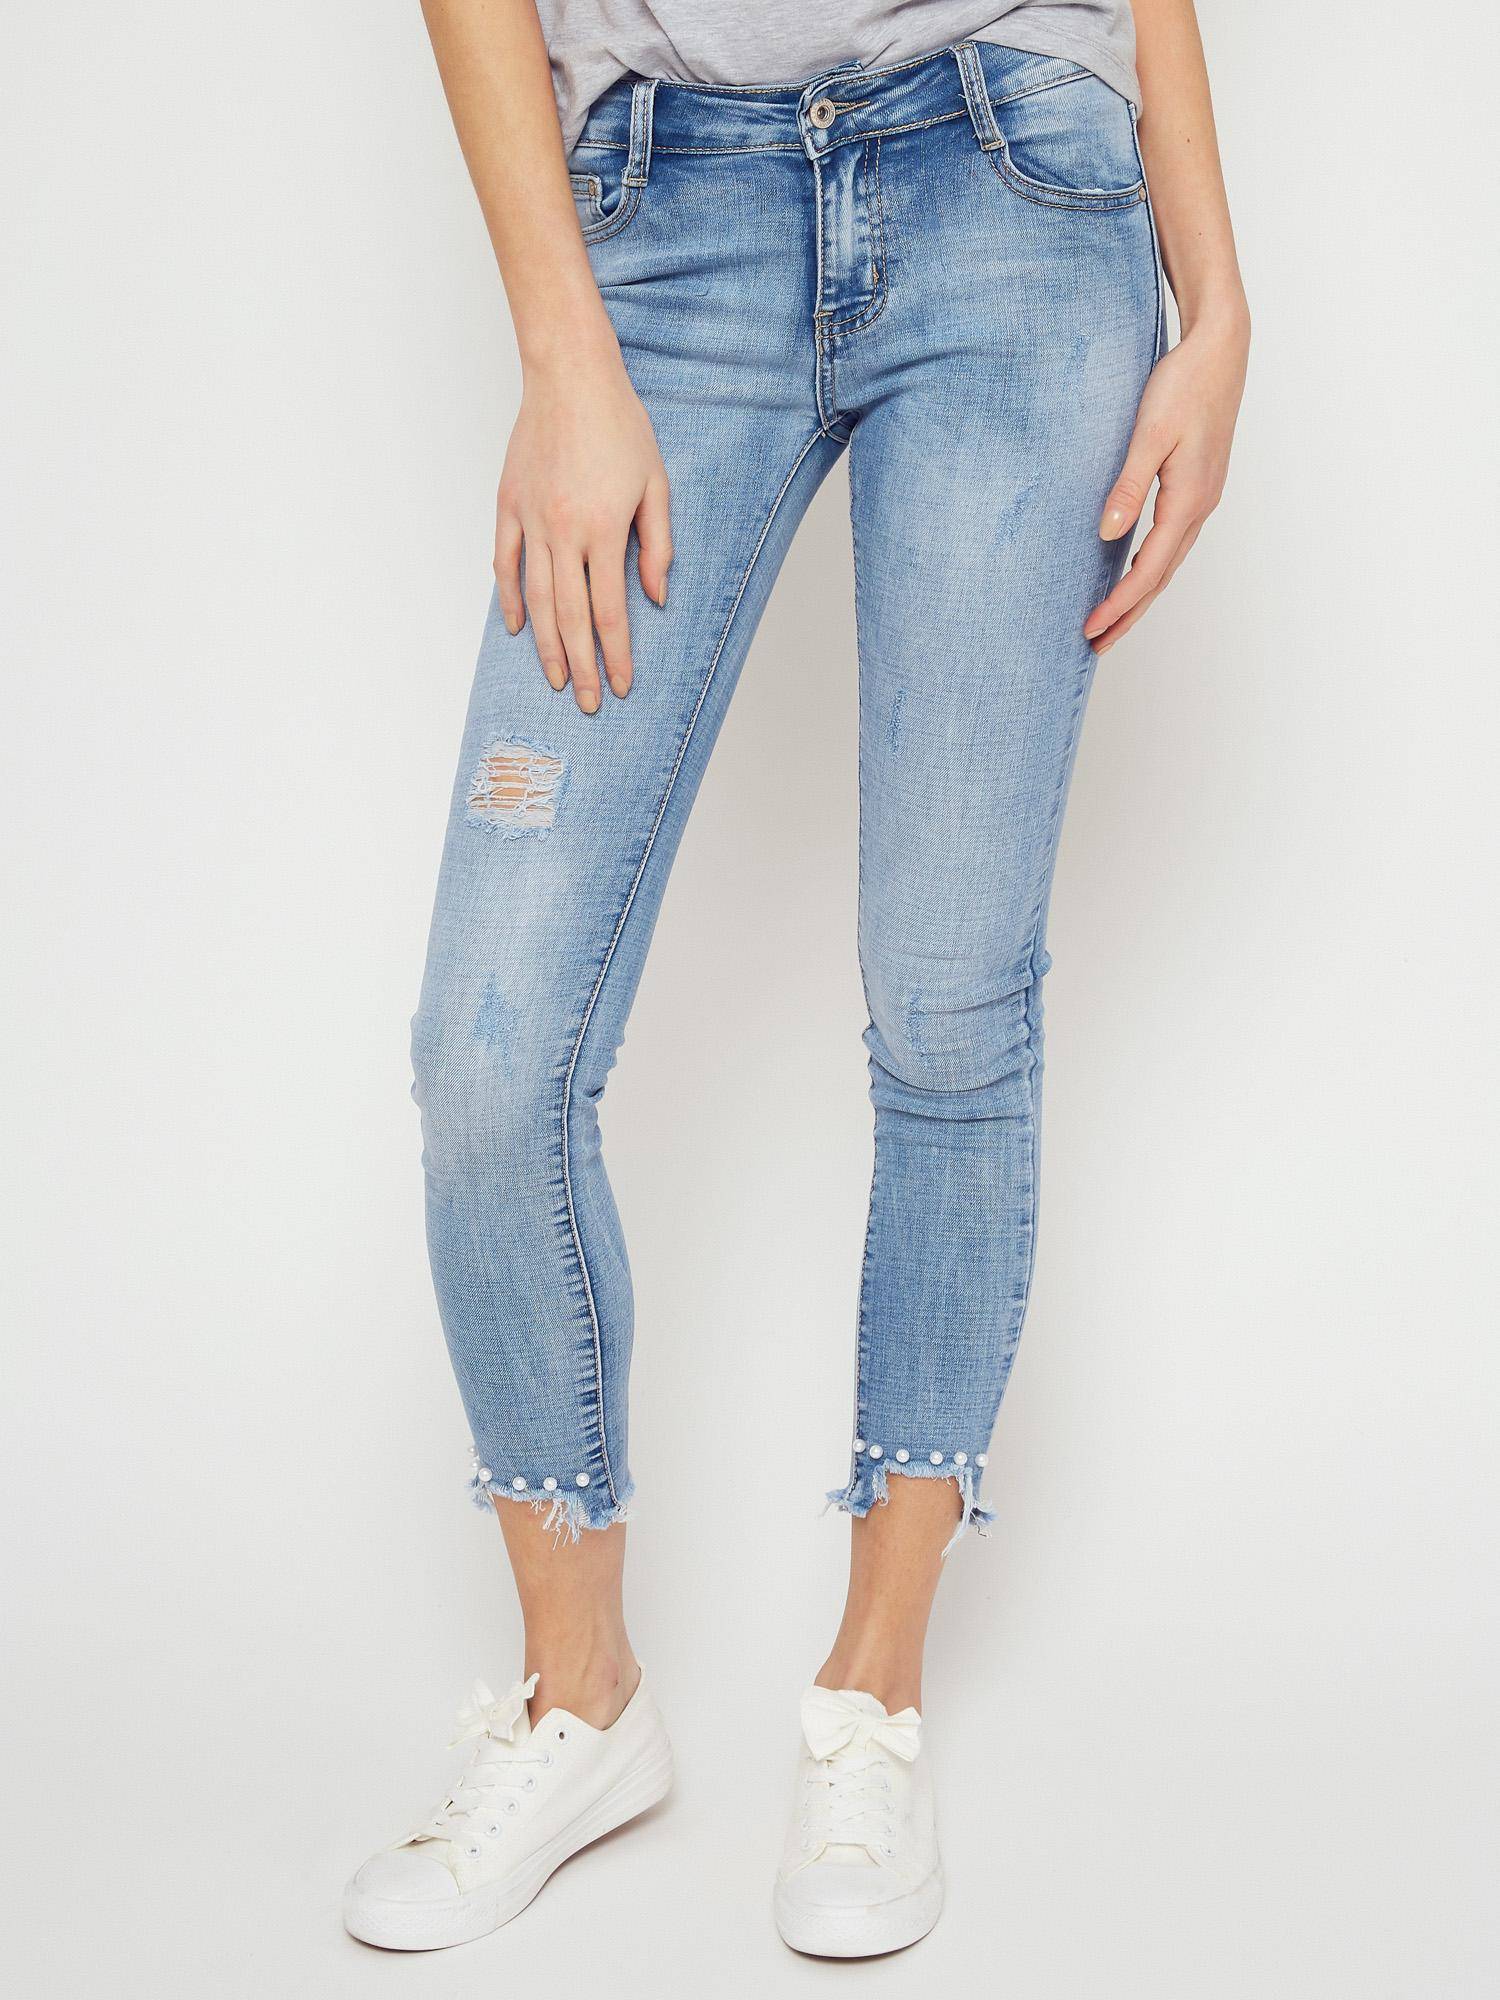 Denim jeans decorated with blue pearls